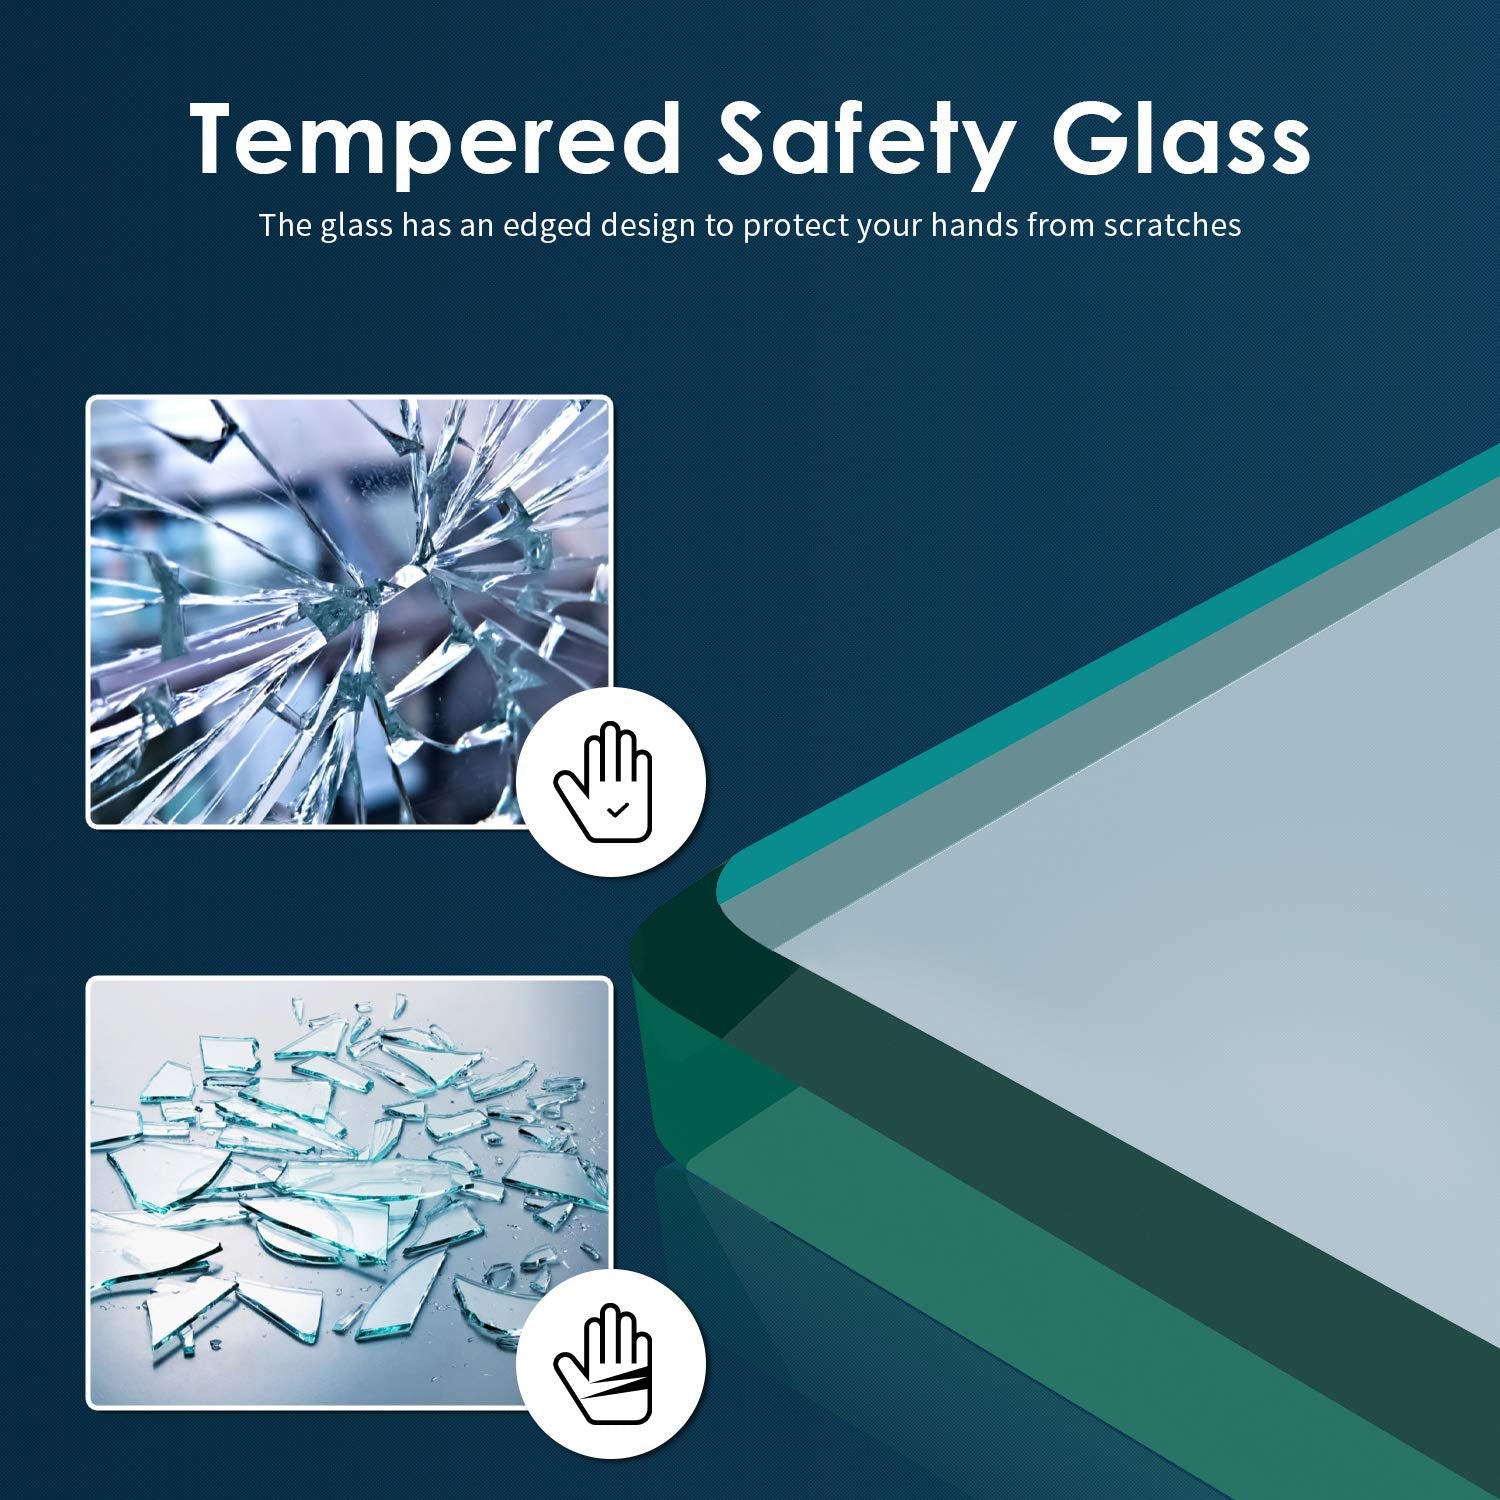 1/4 inch thick tempered glass certified by ANSI, completely transparent clear, making your bathroom more elegant